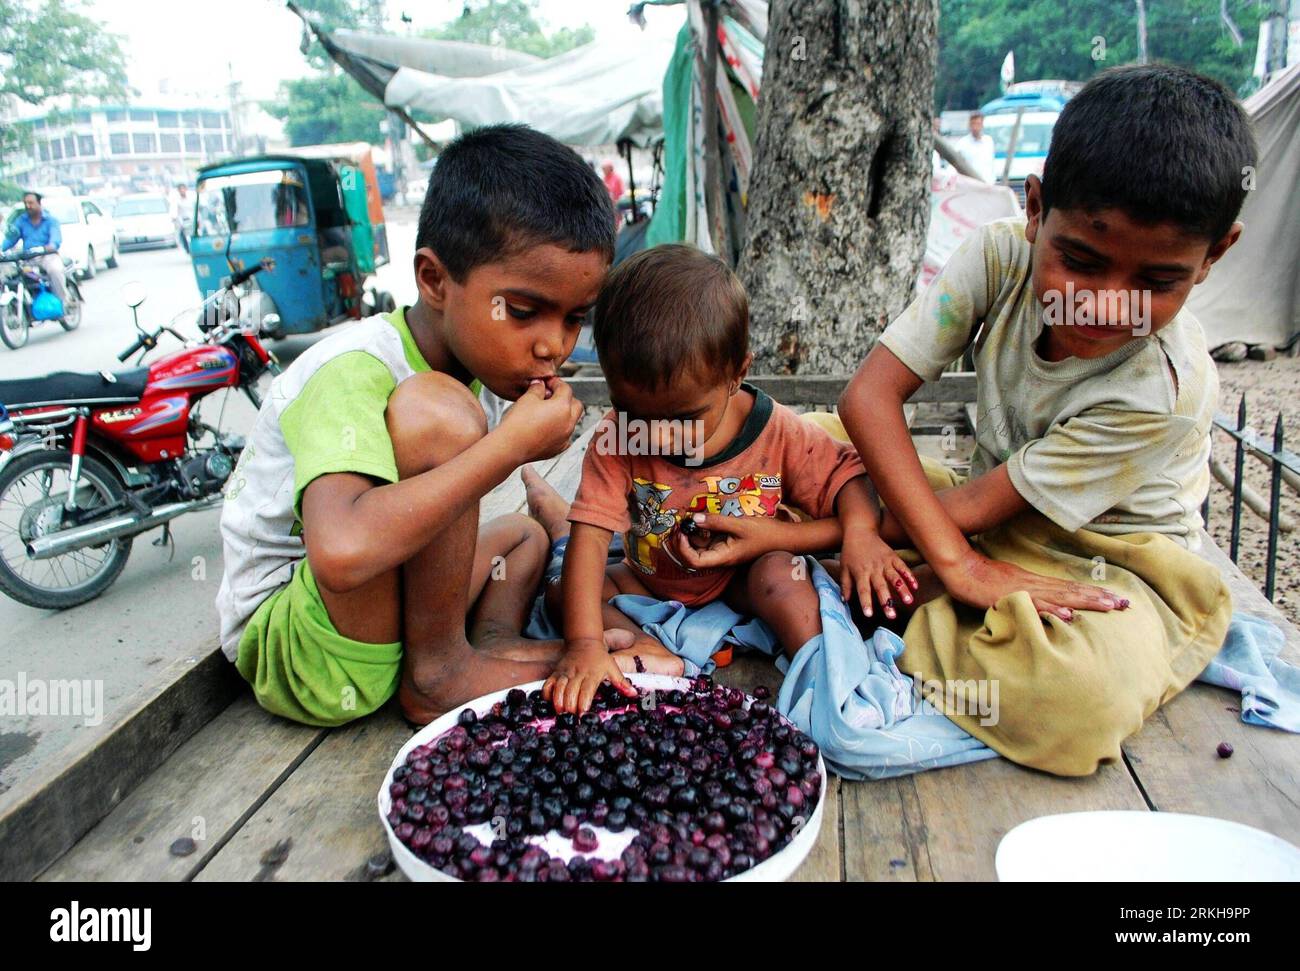 Bildnummer: 55768602  Datum: 15.08.2011  Copyright: imago/Xinhua (110815) -- LAHORE, Aug. 15, 2011 (Xinhua) -- Pakistani homeless children eat fruit at a slum in eastern Pakistan s Lahore, Aug. 15, 2011. High and volatile food prices in Pakistan lead to violence and unrest as nearly 120 million of the total population here is forced to spend 50 to 70 percent of their incomes on x. (Xinhua Photo/Jamil Ahmed) (lt) PAKISTAN-HIGH FOOD PRICES PUBLICATIONxNOTxINxCHN Gesellschaft Kinder Kinderarmut Armut xst 2011 quer o0 Früchte essen    Bildnummer 55768602 Date 15 08 2011 Copyright Imago XINHUA  Lah Stock Photo